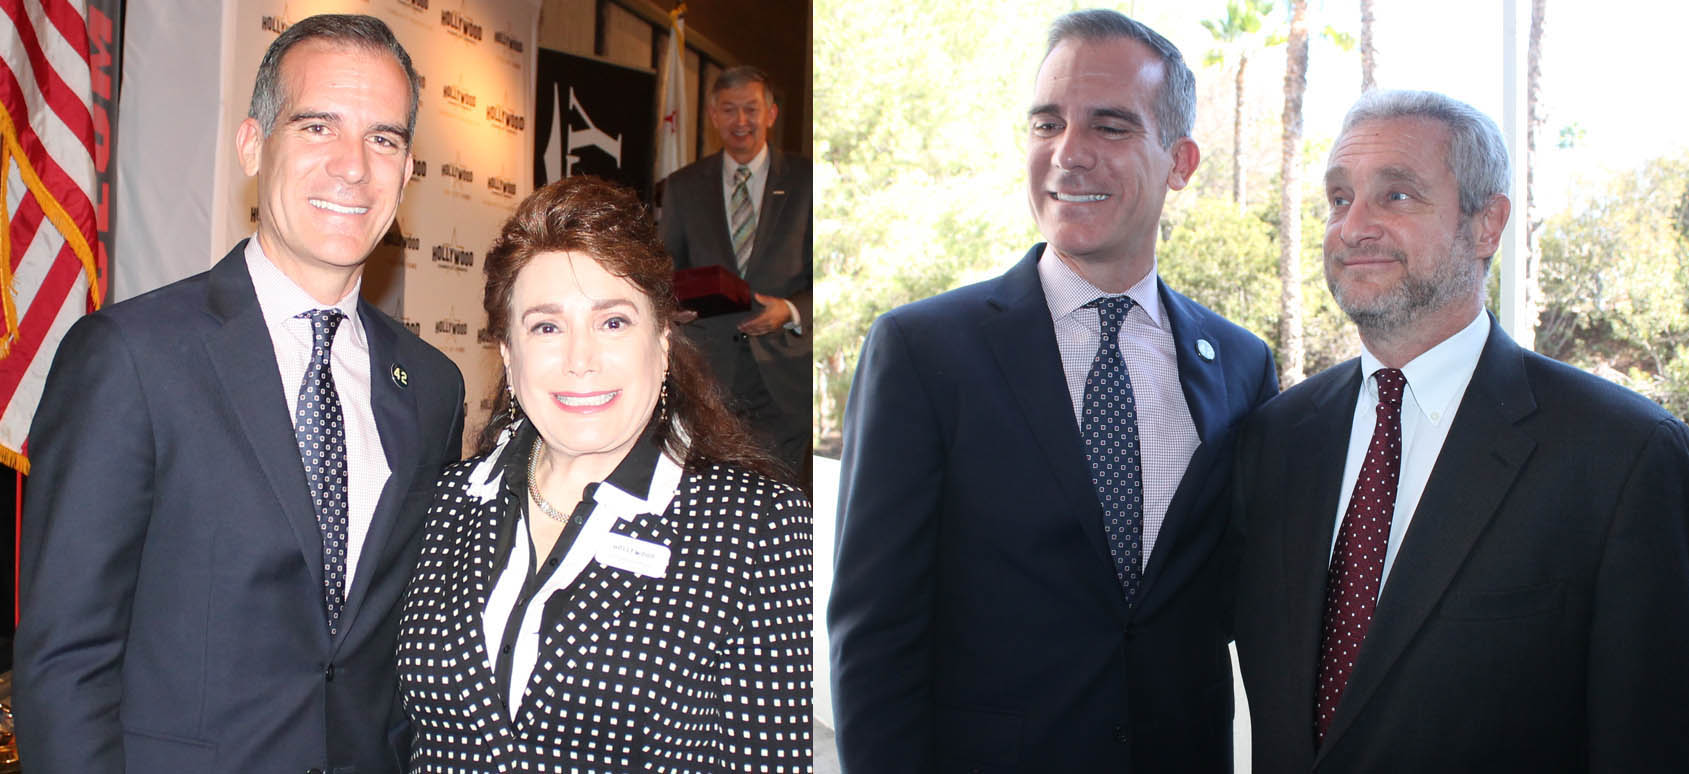 Mayor Eric Garcetti with Presenting Sponsor Donelle Dadigan of the Hollywood Museum (left) and Partnering Sponsor David Green of Pantages Theatre - Nederlander West Coast (right).